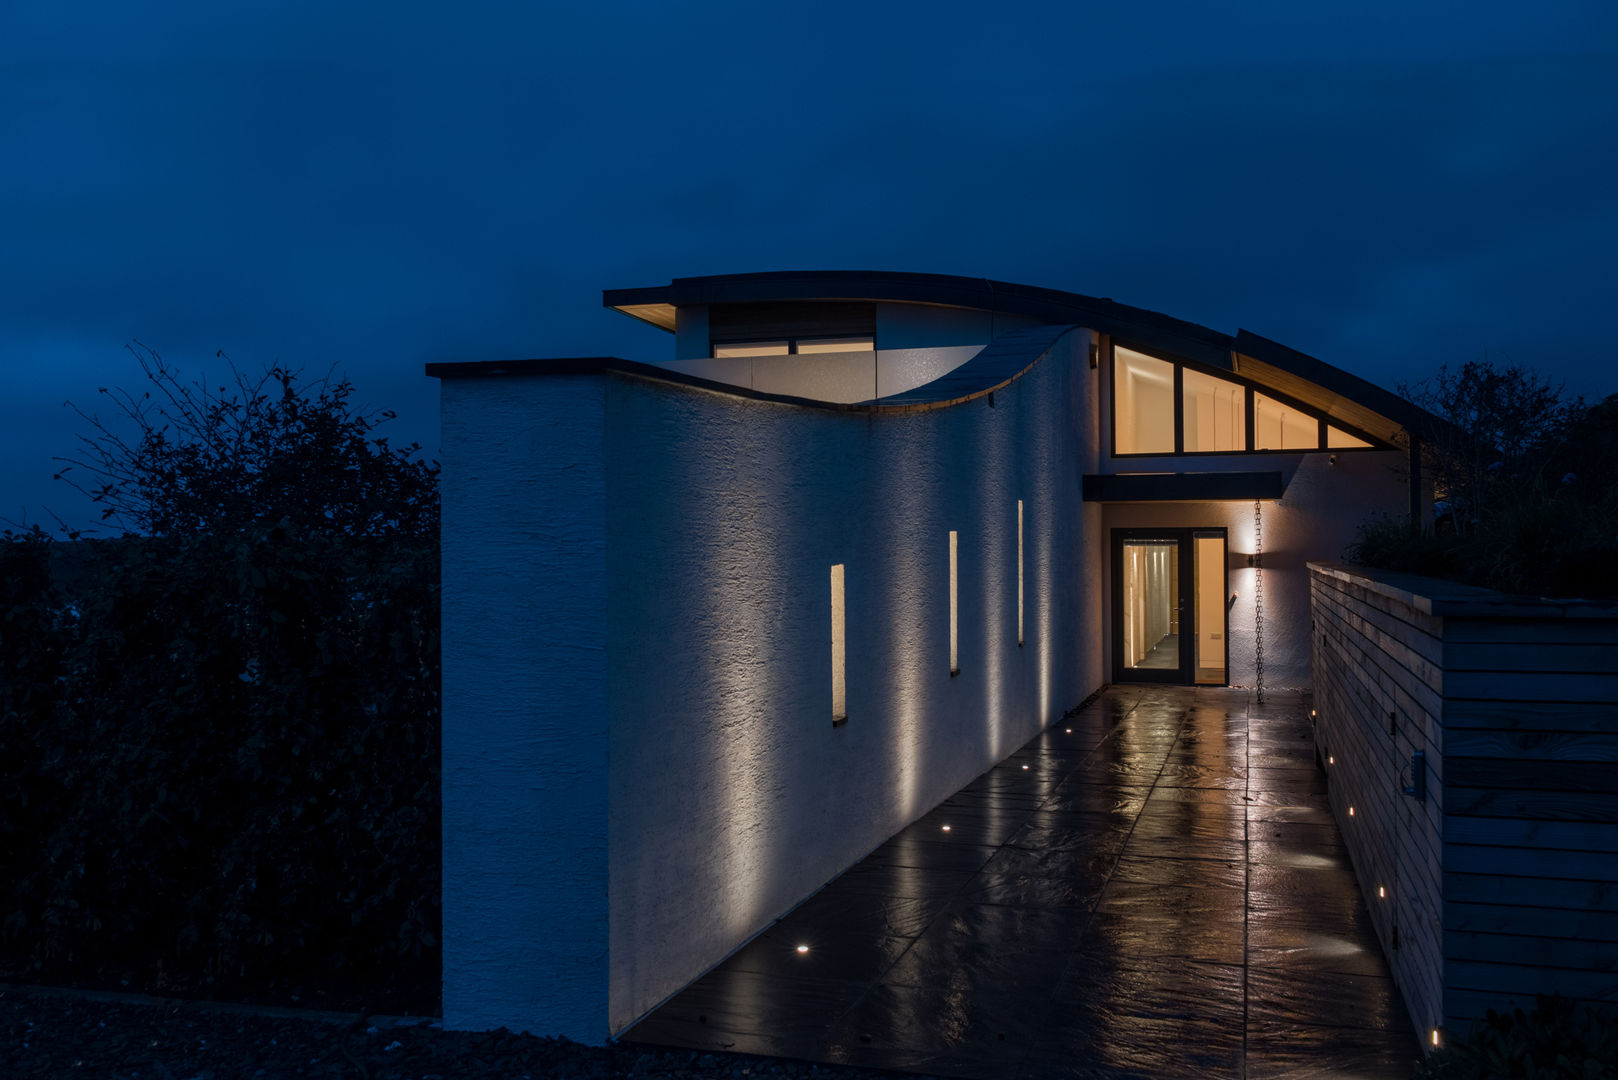 New Contemporary House, Polzeath, Cornwall Arco2 Architecture Ltd Case moderne Architects Cornwall, architecture Cornwall, arco2 architects, eco friendly architects, sustainable architects, sustainable architecture, architecture by the sea, beach house architecture,